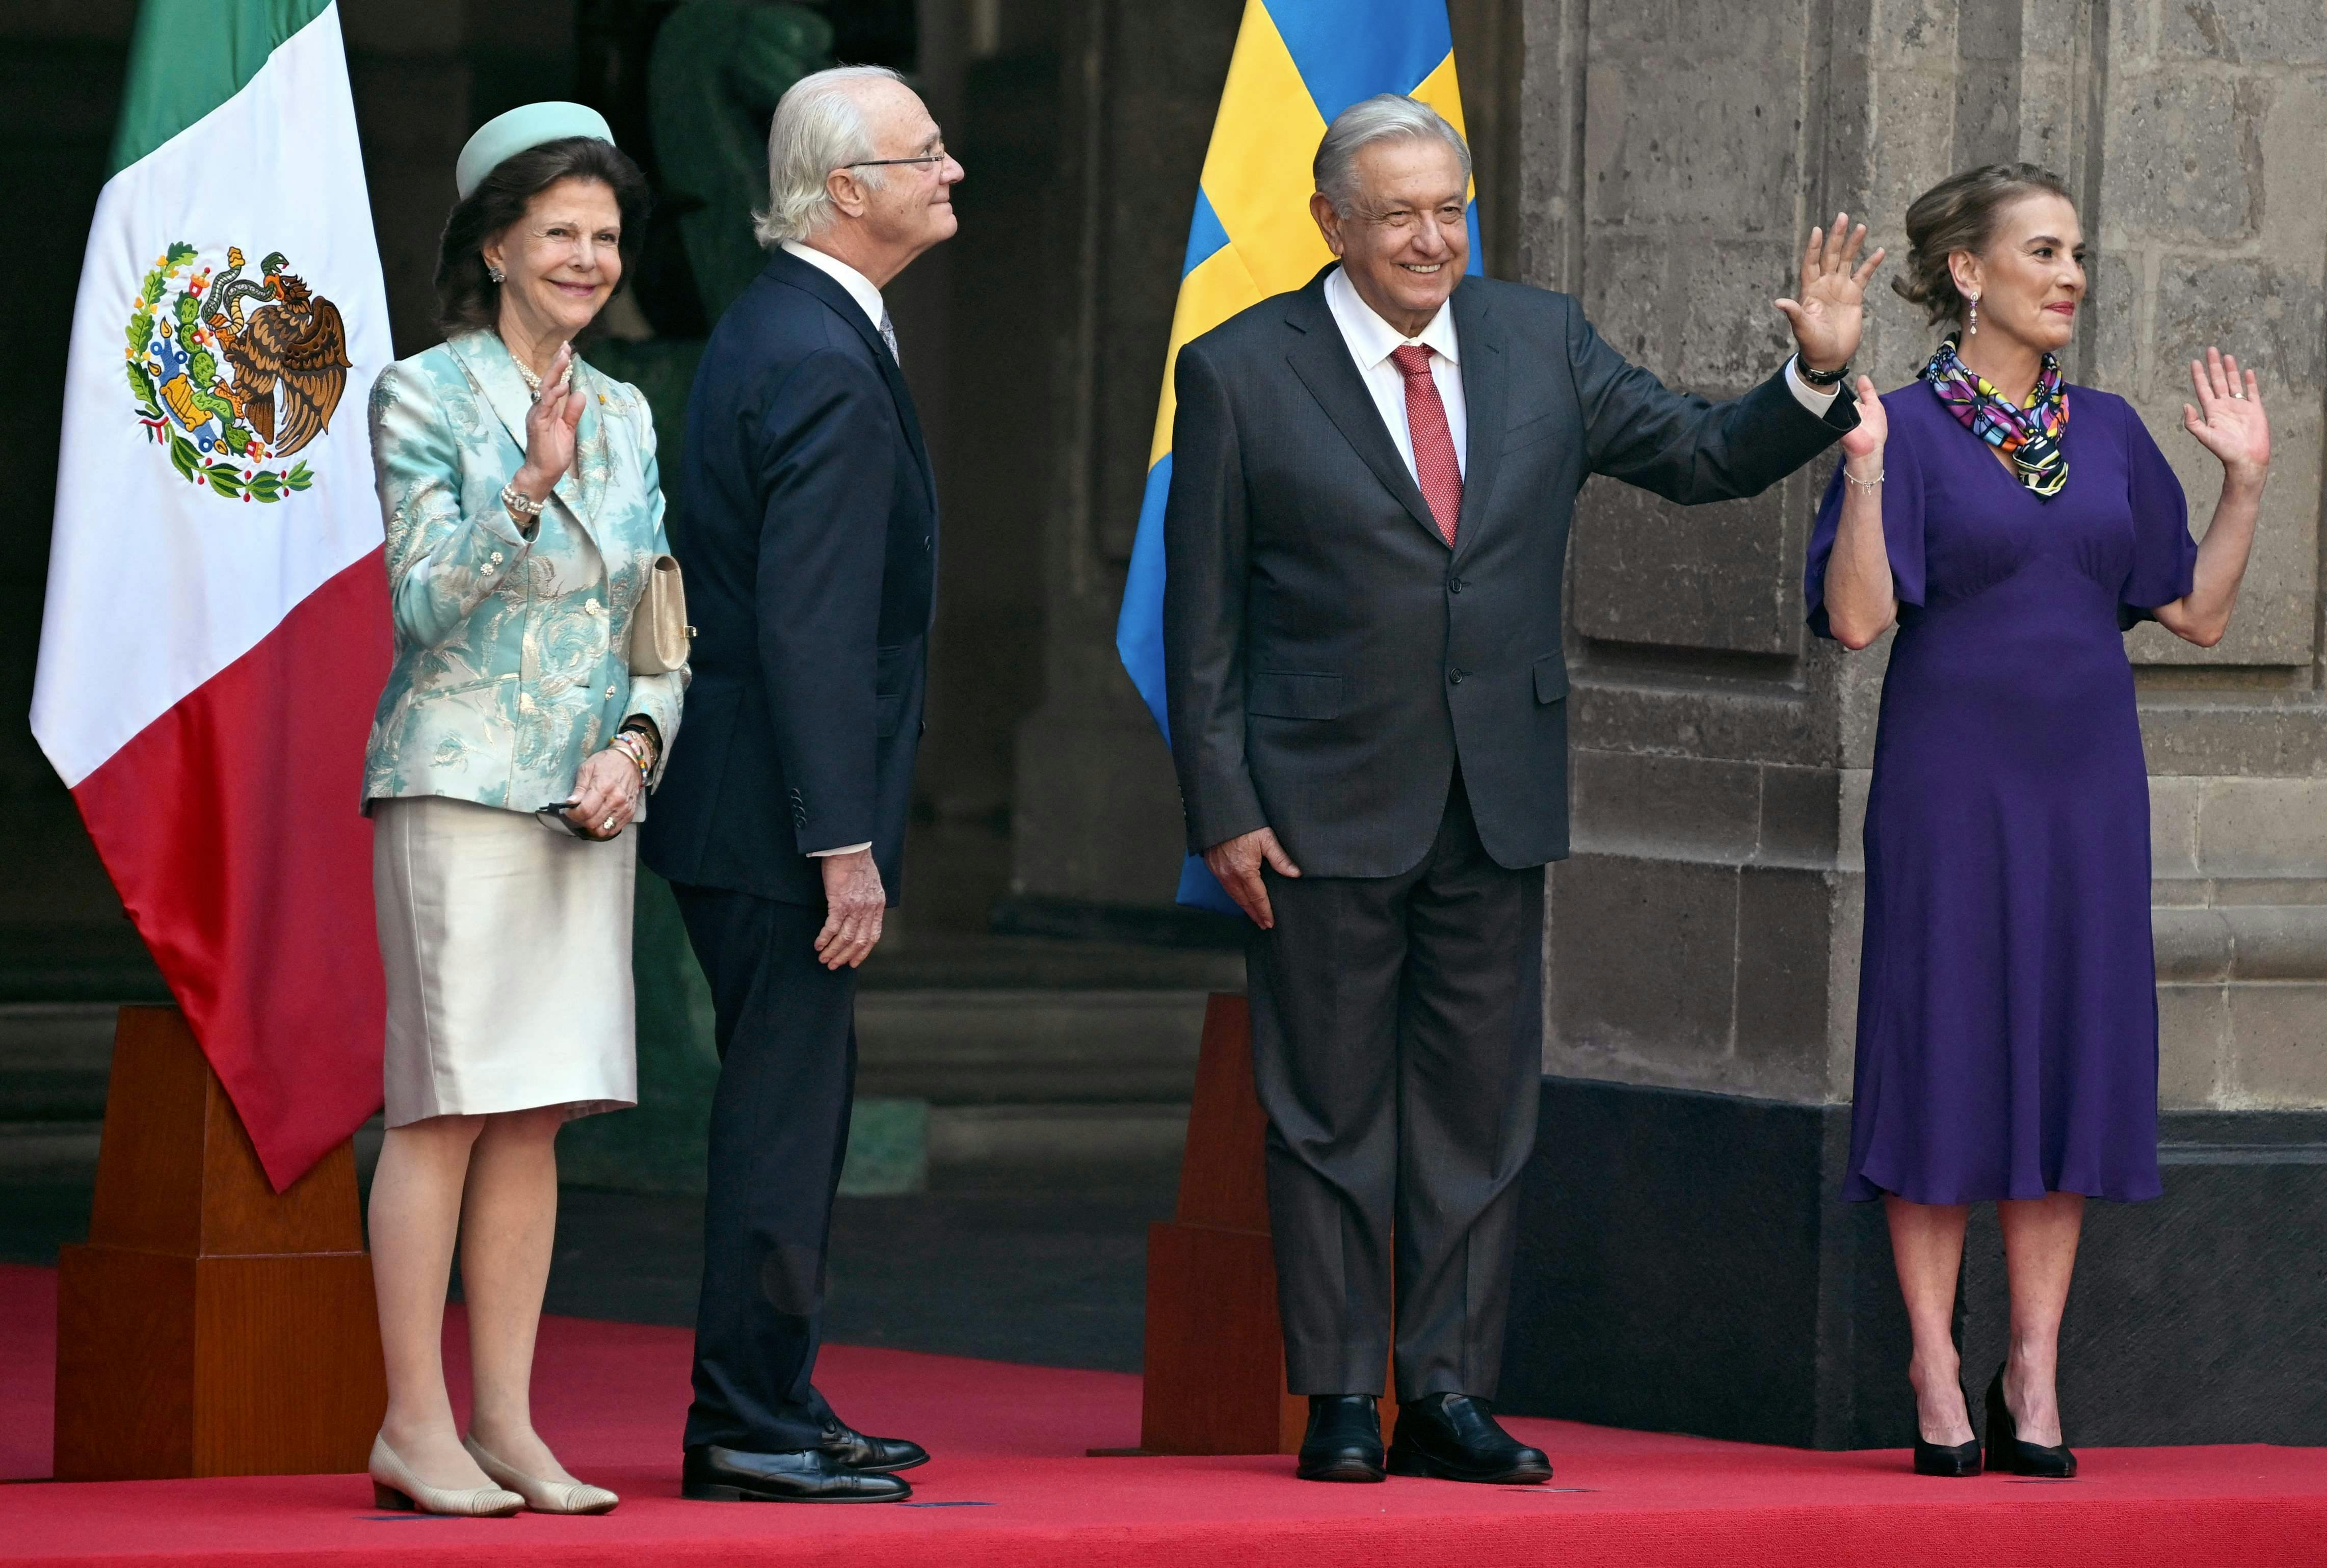 (L to R) Queen Silvia of Sweden, King Carl XVI Gustaf of Sweden, Mexican President Andres Manuel Lopez Obrador, and his wife Beatriz Gutierrez participate in an official welcome ceremony at the National Palace in Mexico City on March 12, 2024. (Photo by ALFREDO ESTRELLA / AFP)